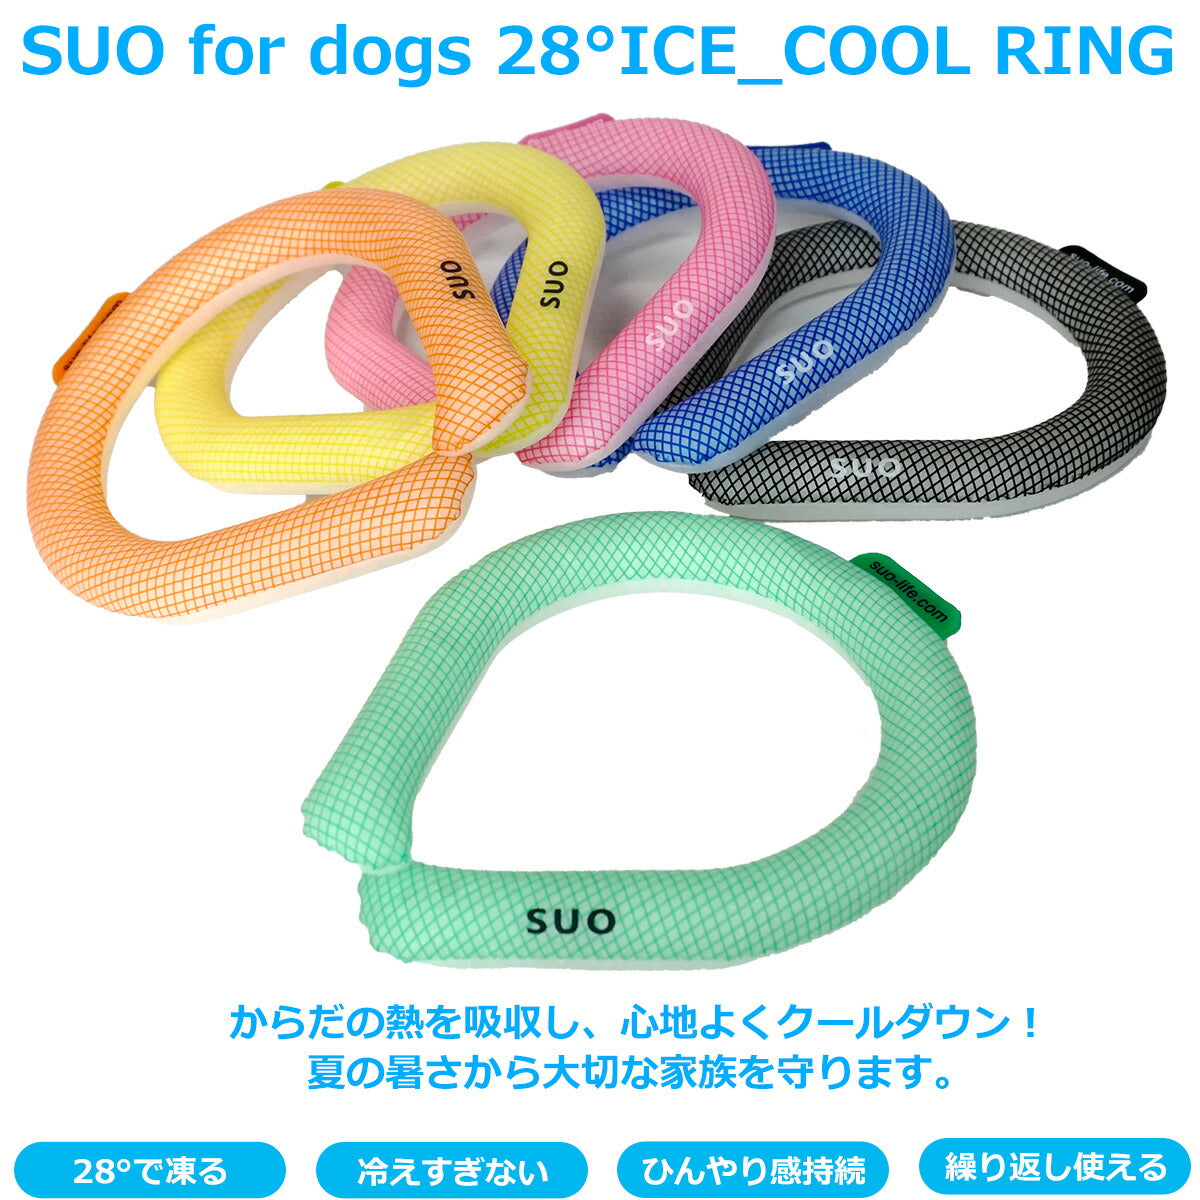 SUO for dogs 28°ICE SUOリング ボタンなし M ピンク 熱中症対策グッズ 暑さ対策 ひんやり 首 冷感 犬 大人 子供